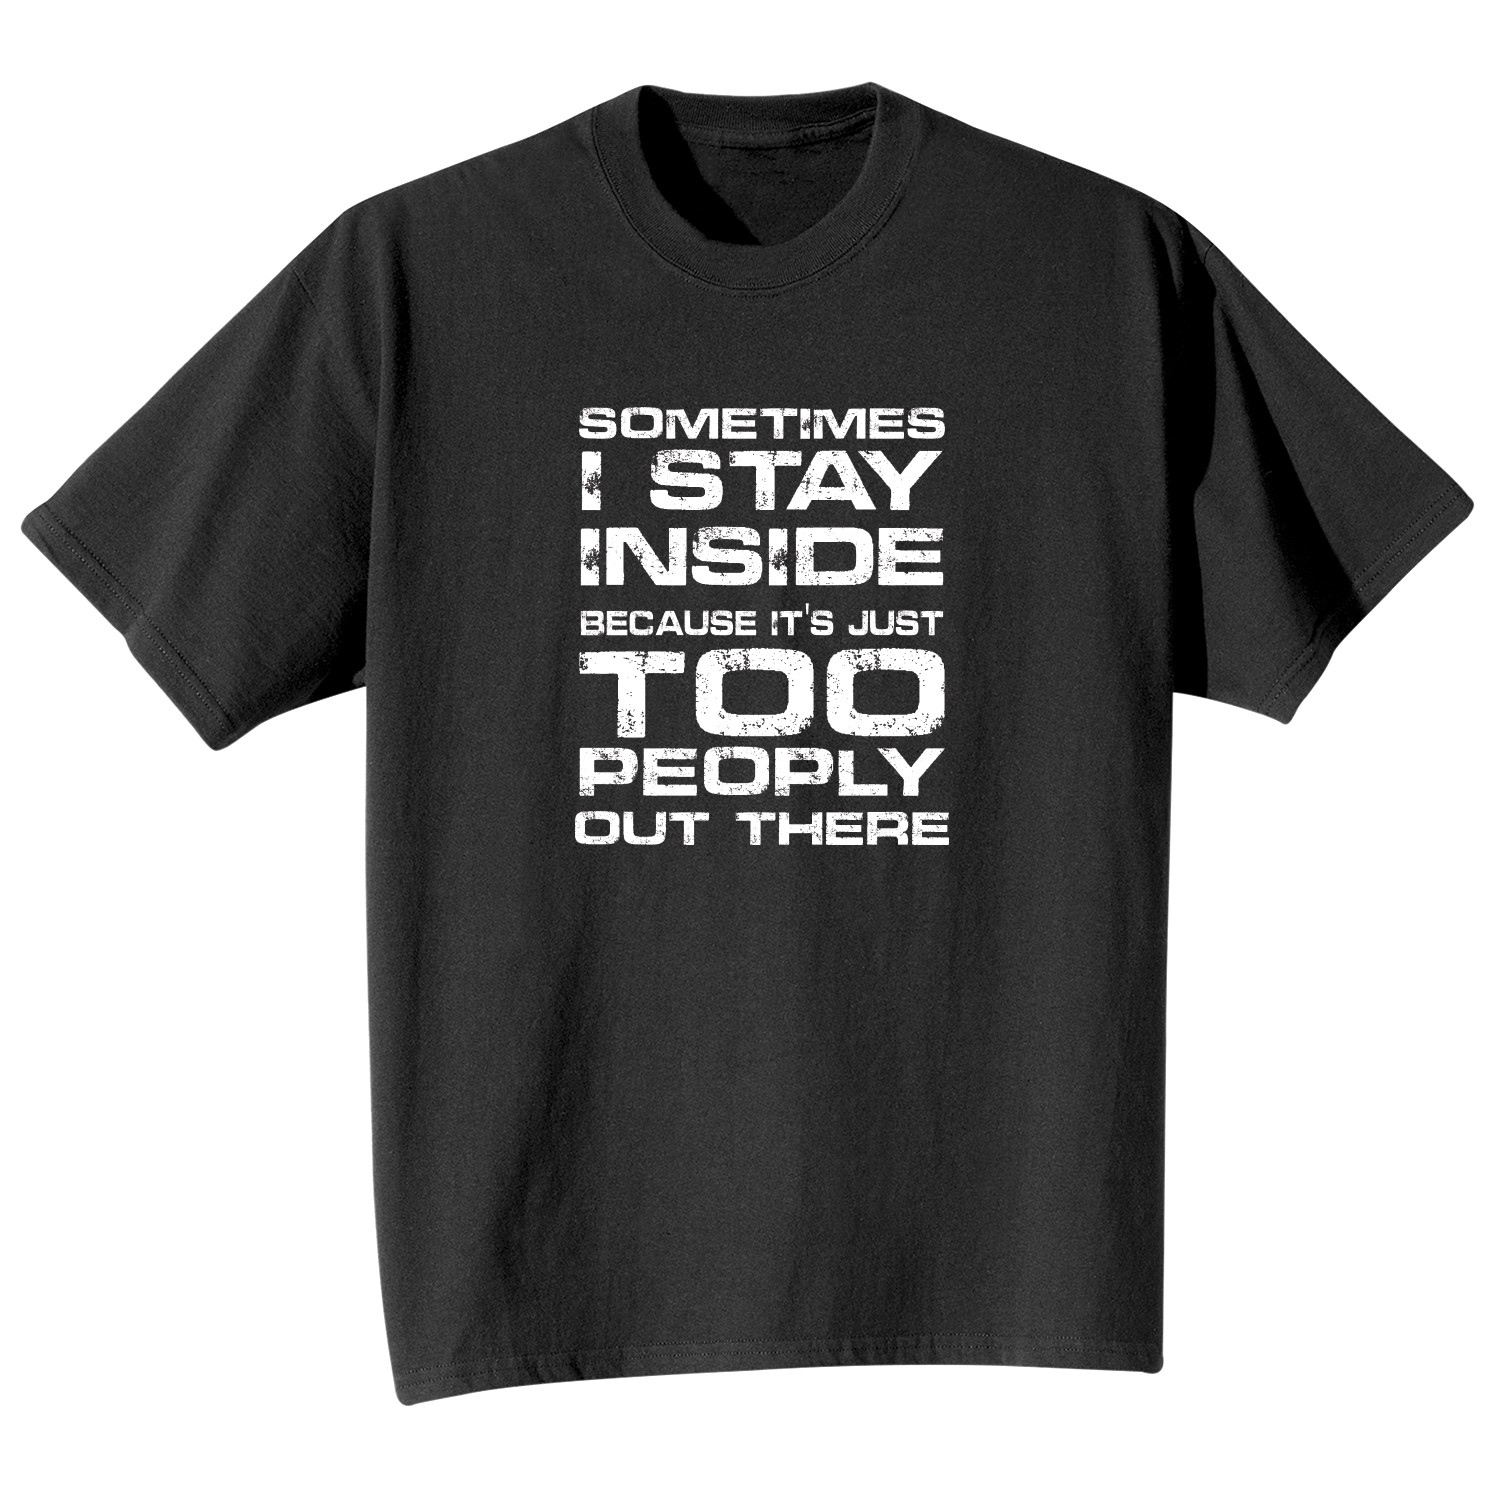 Sometimes I Stay Inside Because It's Just Too Peoply Out There T-Shirt ...